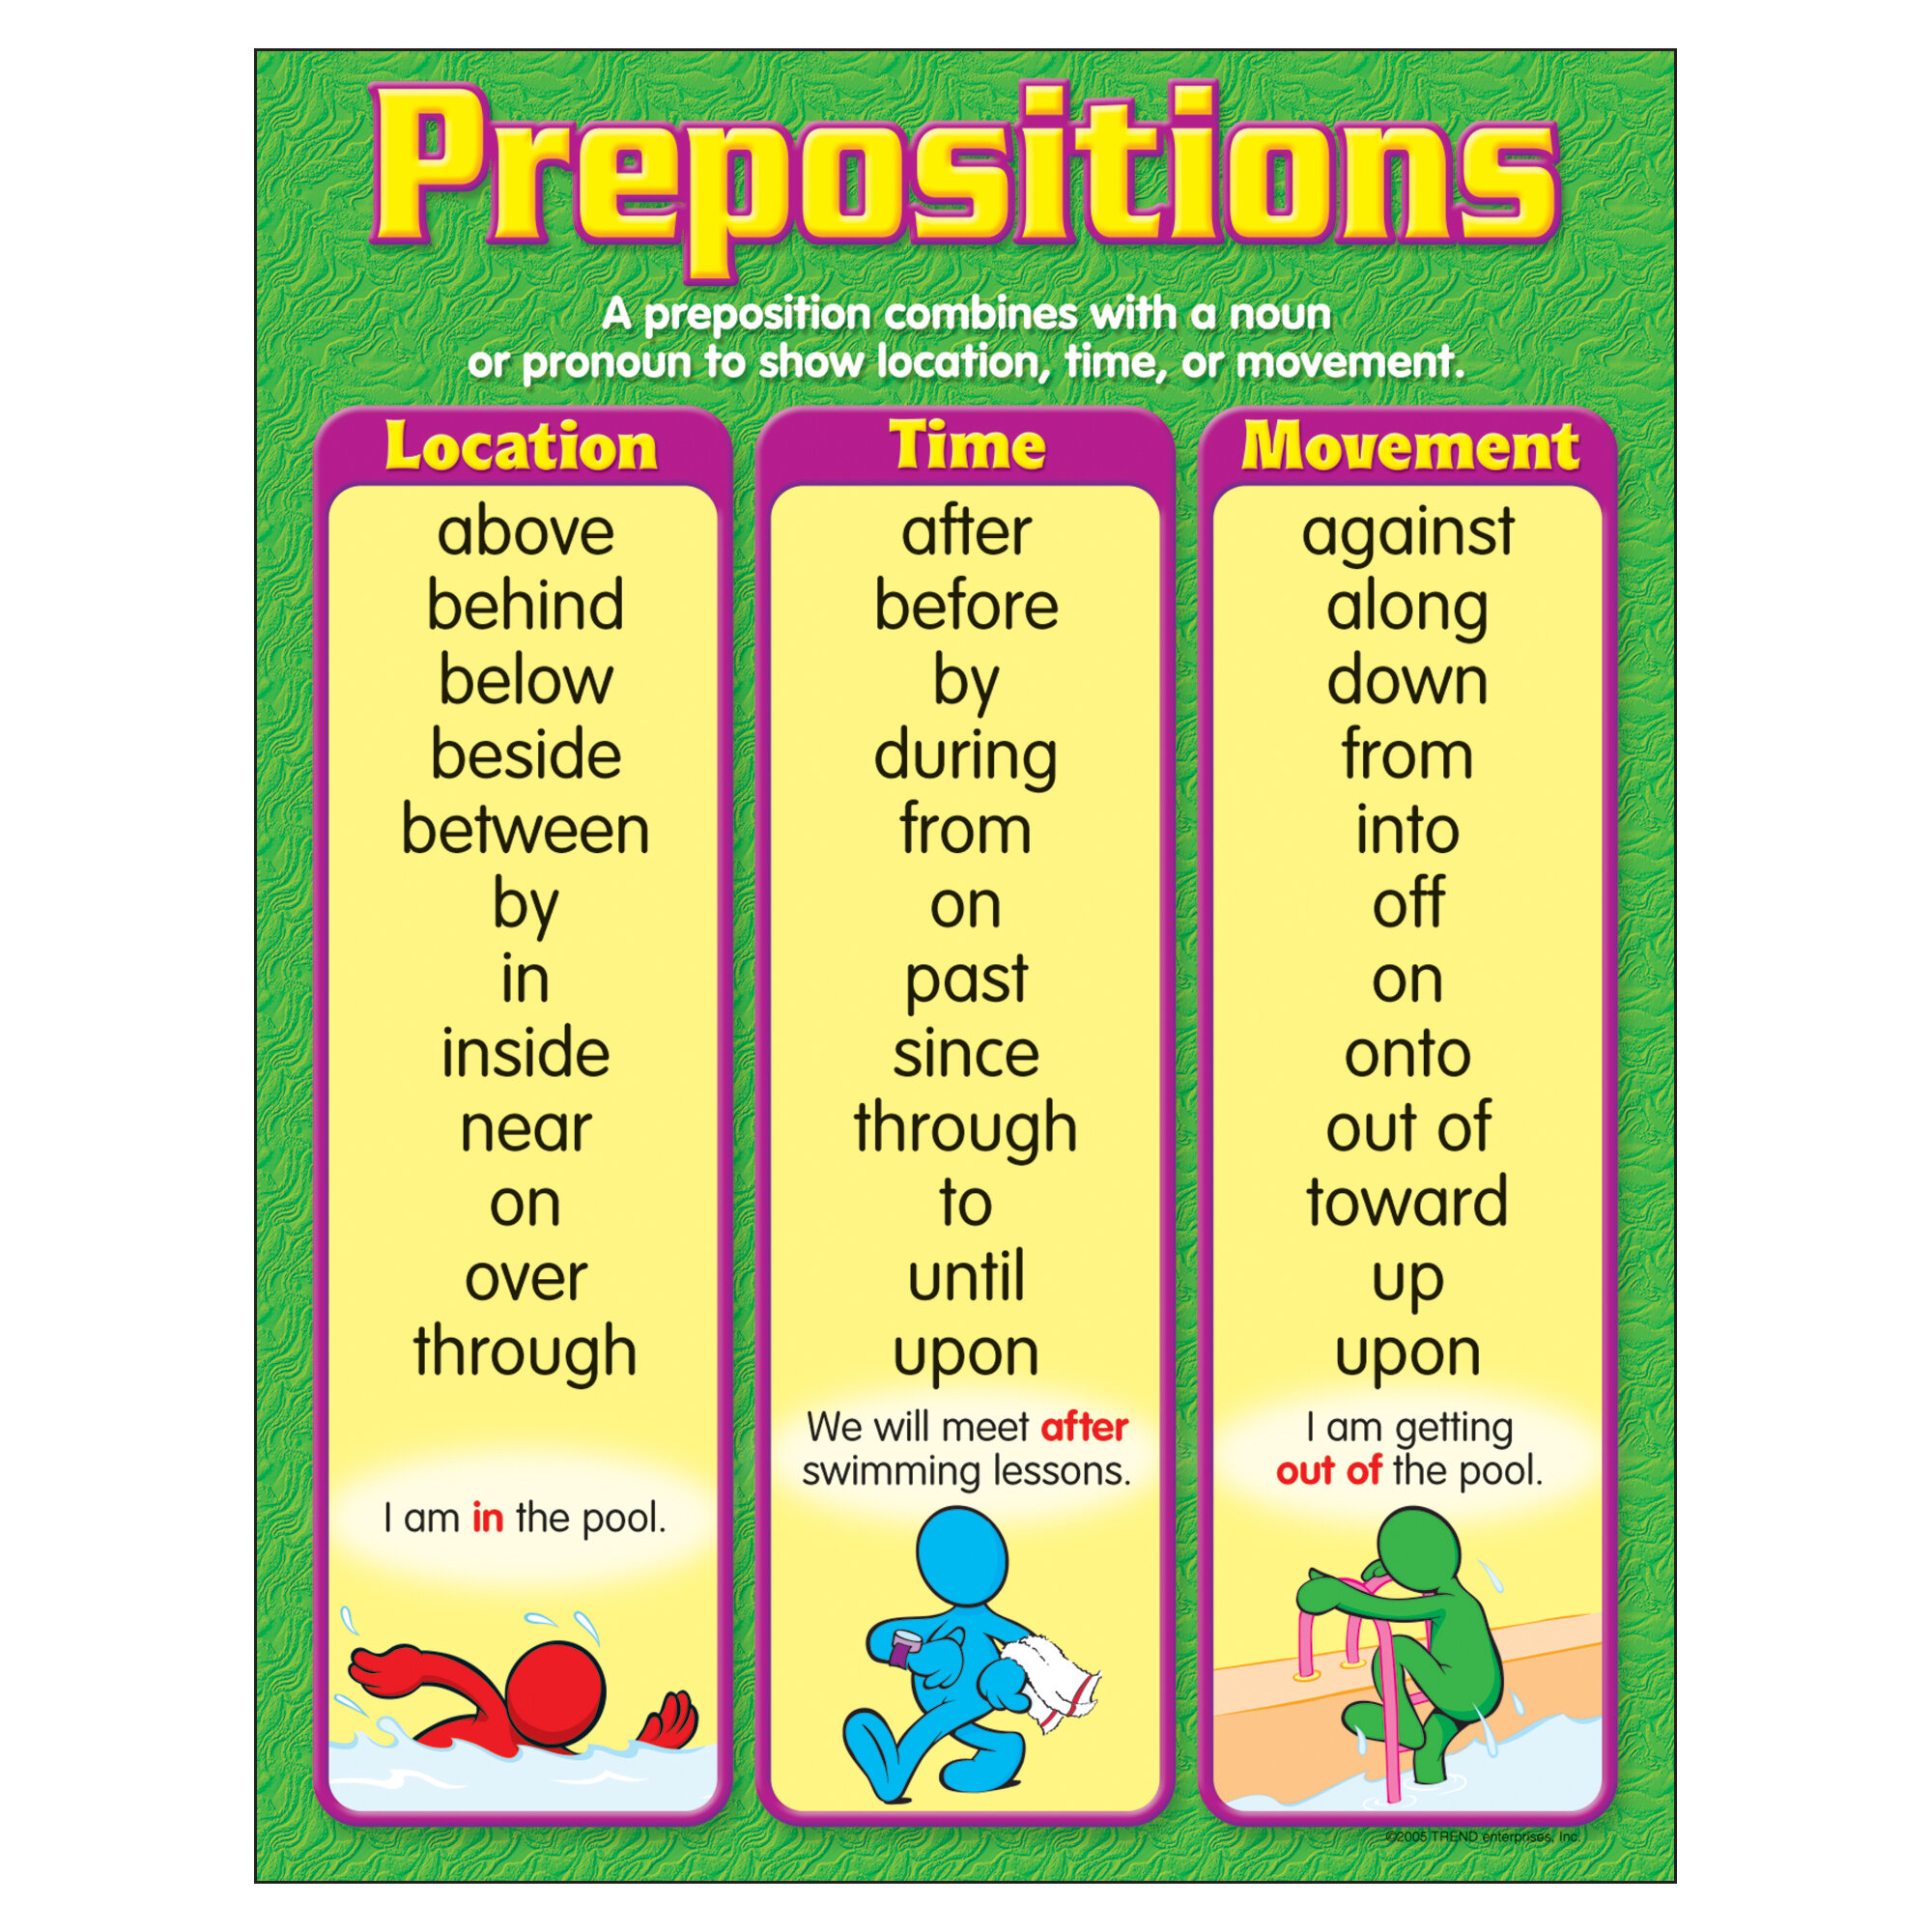 Prepositions Rules Chart